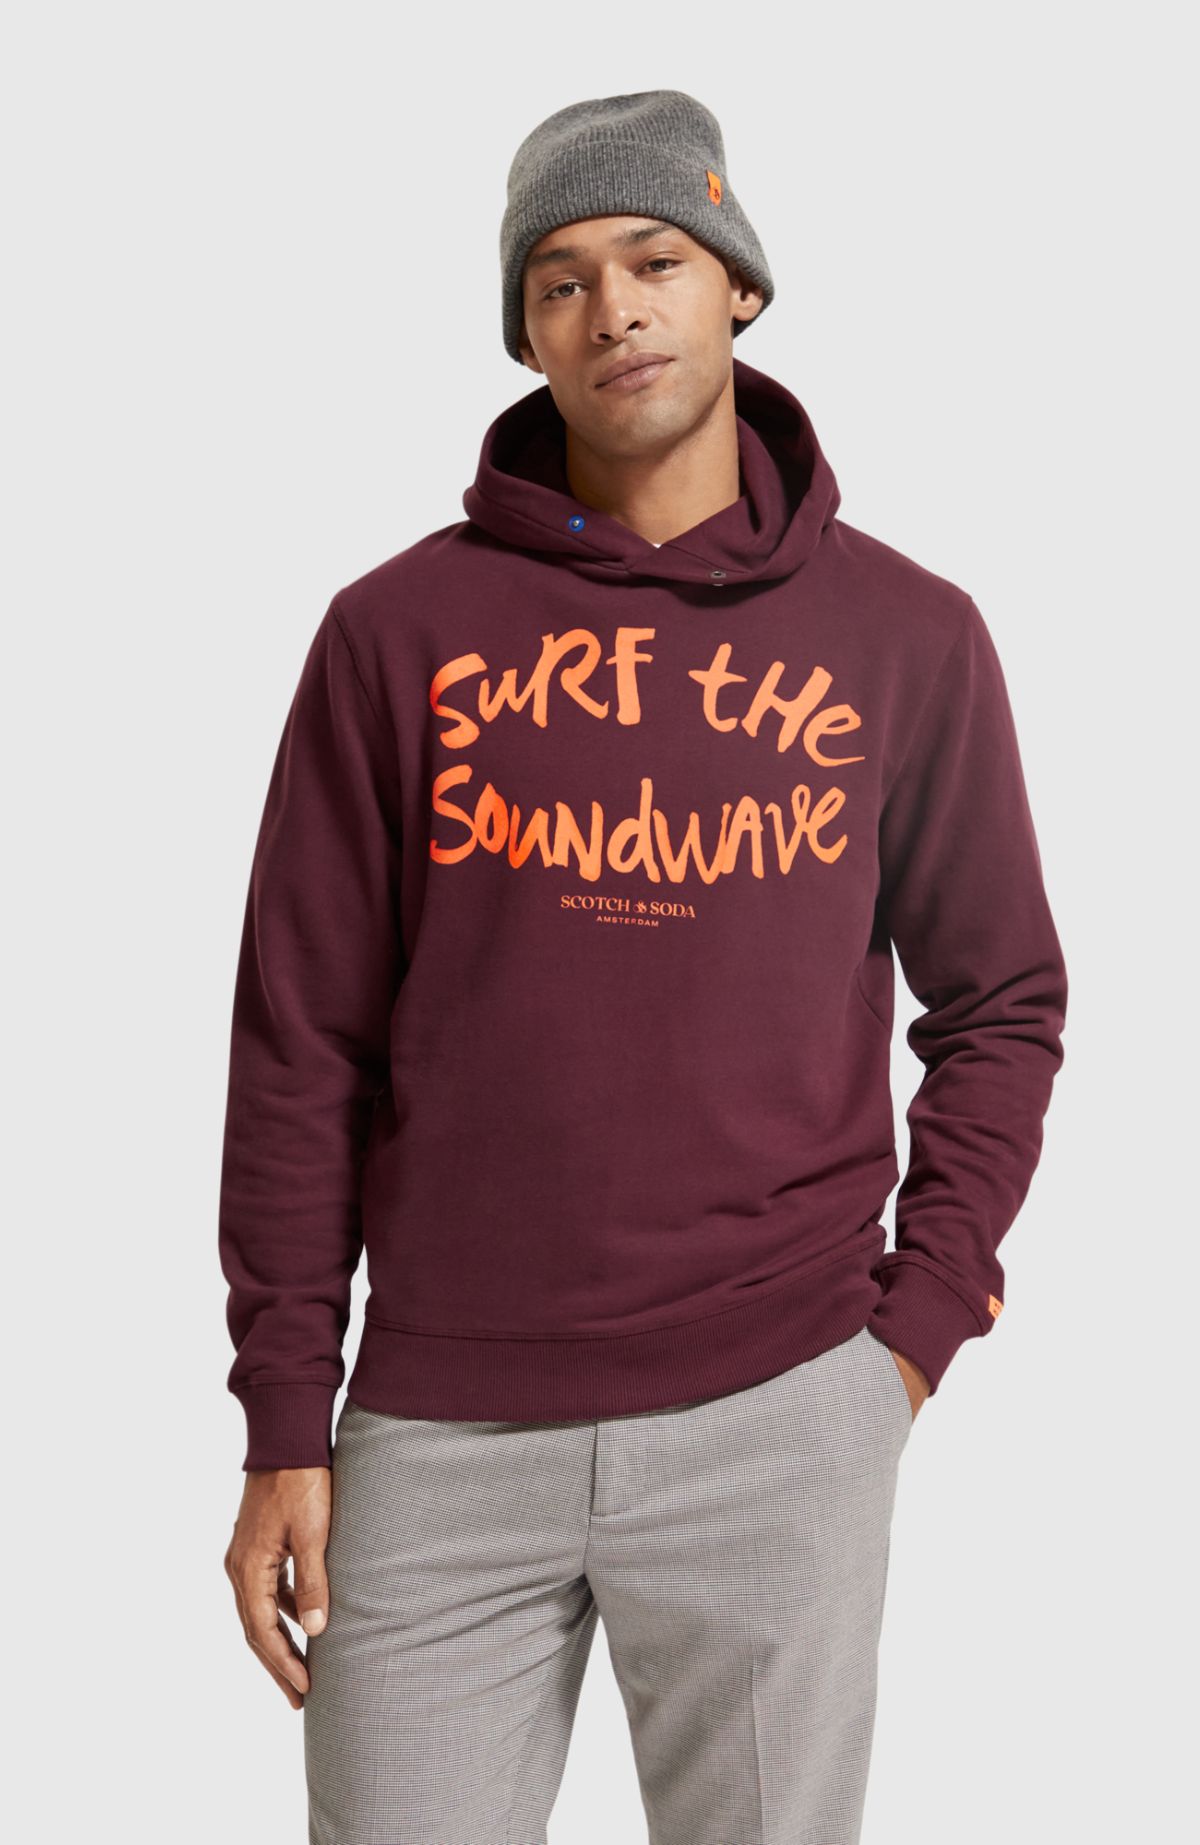 Regular fit surf the soundwave hoodie in Organic Cotton